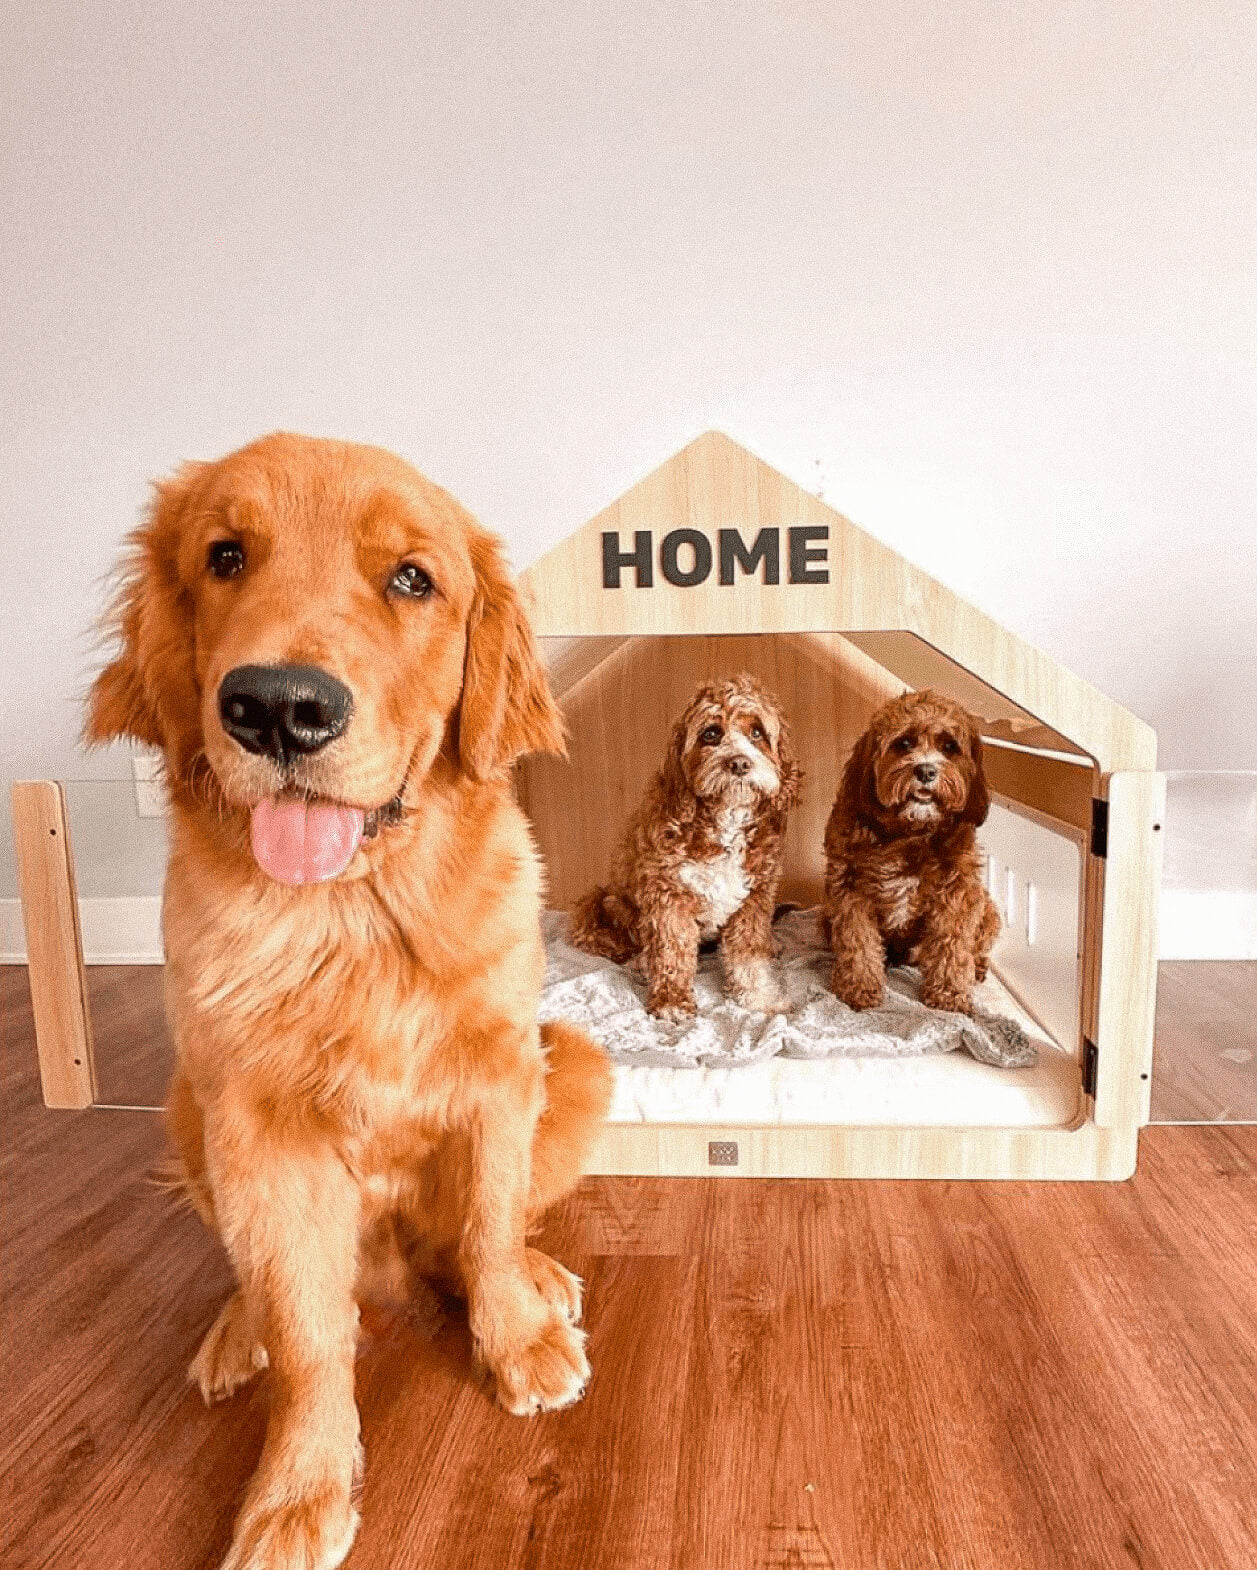 Two goldendoodles in the Wooffy modern indoor dog house and a Golden Retriever next to it